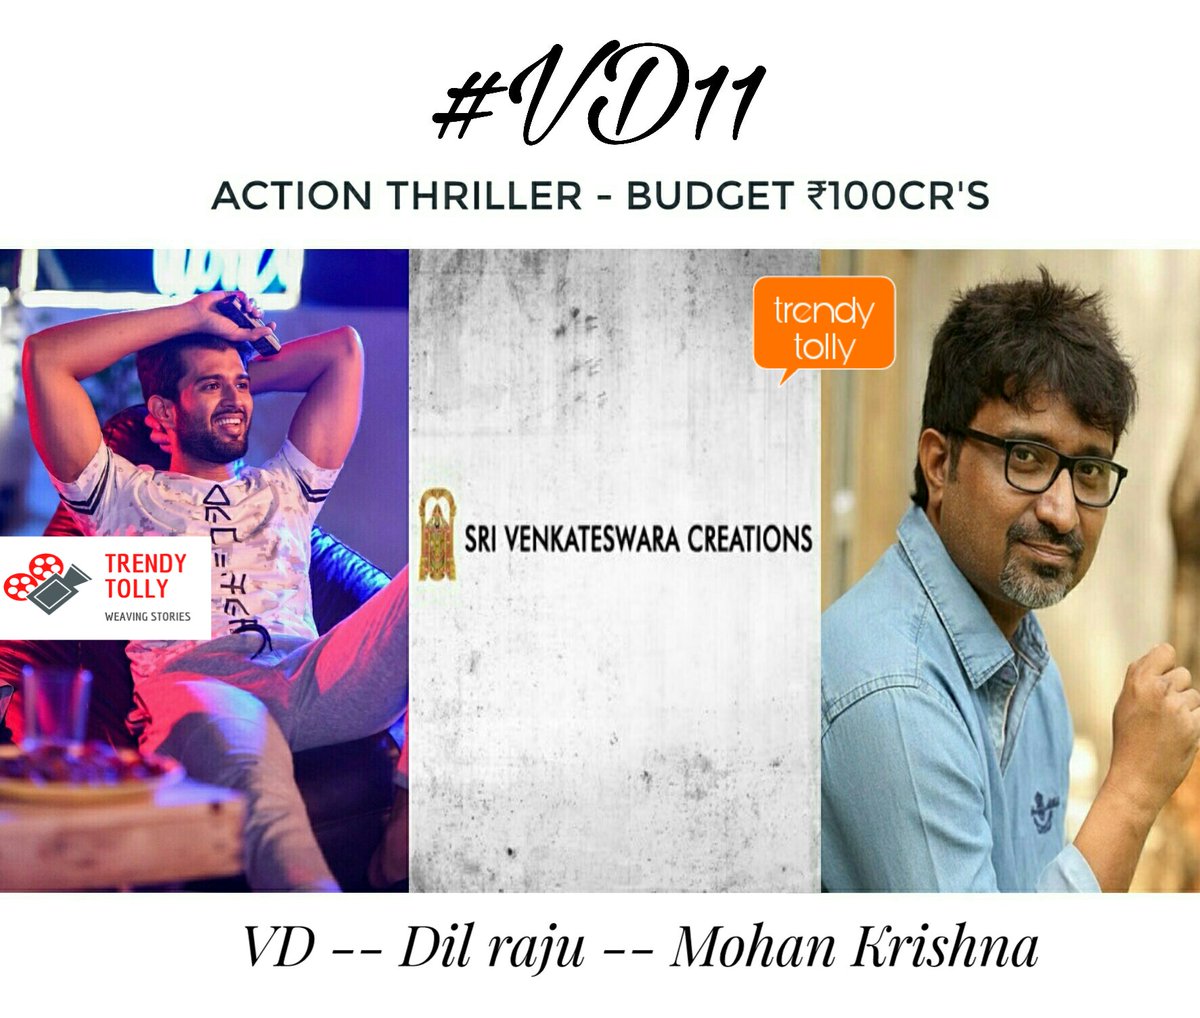 Tollywood Buzz 💥

👉 #VD11 a pan india film making with budget of whooping ₹100Crores...

👉 It's an action thriller directed by #MohankrishnaIndraganti (#VTheMovie fame) 

👉 For movie updates follow @urstanay 

#VD10 #ArjunReddy #VijayDeverakonda #ArjunReddyTrendOnAug24th